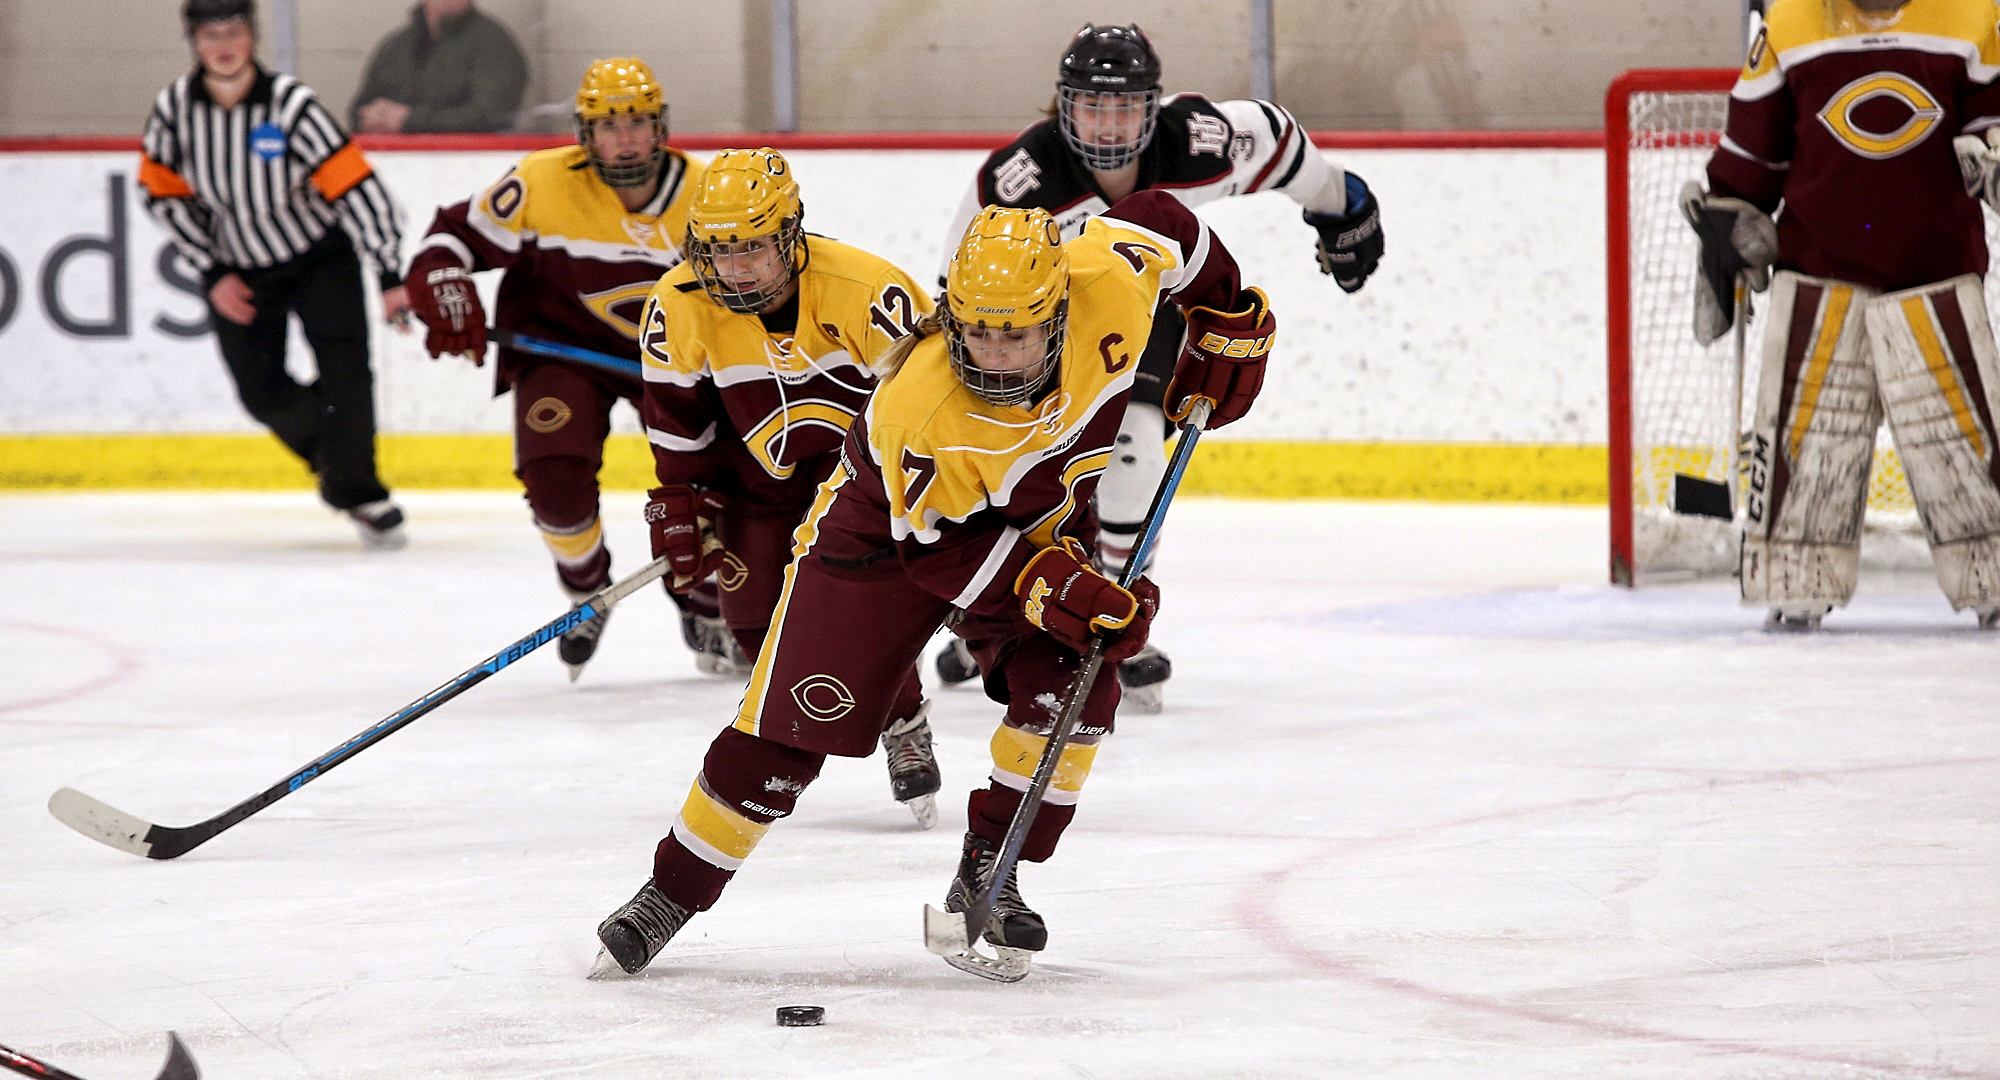 Senior captain Sage Barta carries the puck up the ice during the Cobbers' series finale at Hamline. (Photo courtesy of Ryan Coleman, D3photography.com)